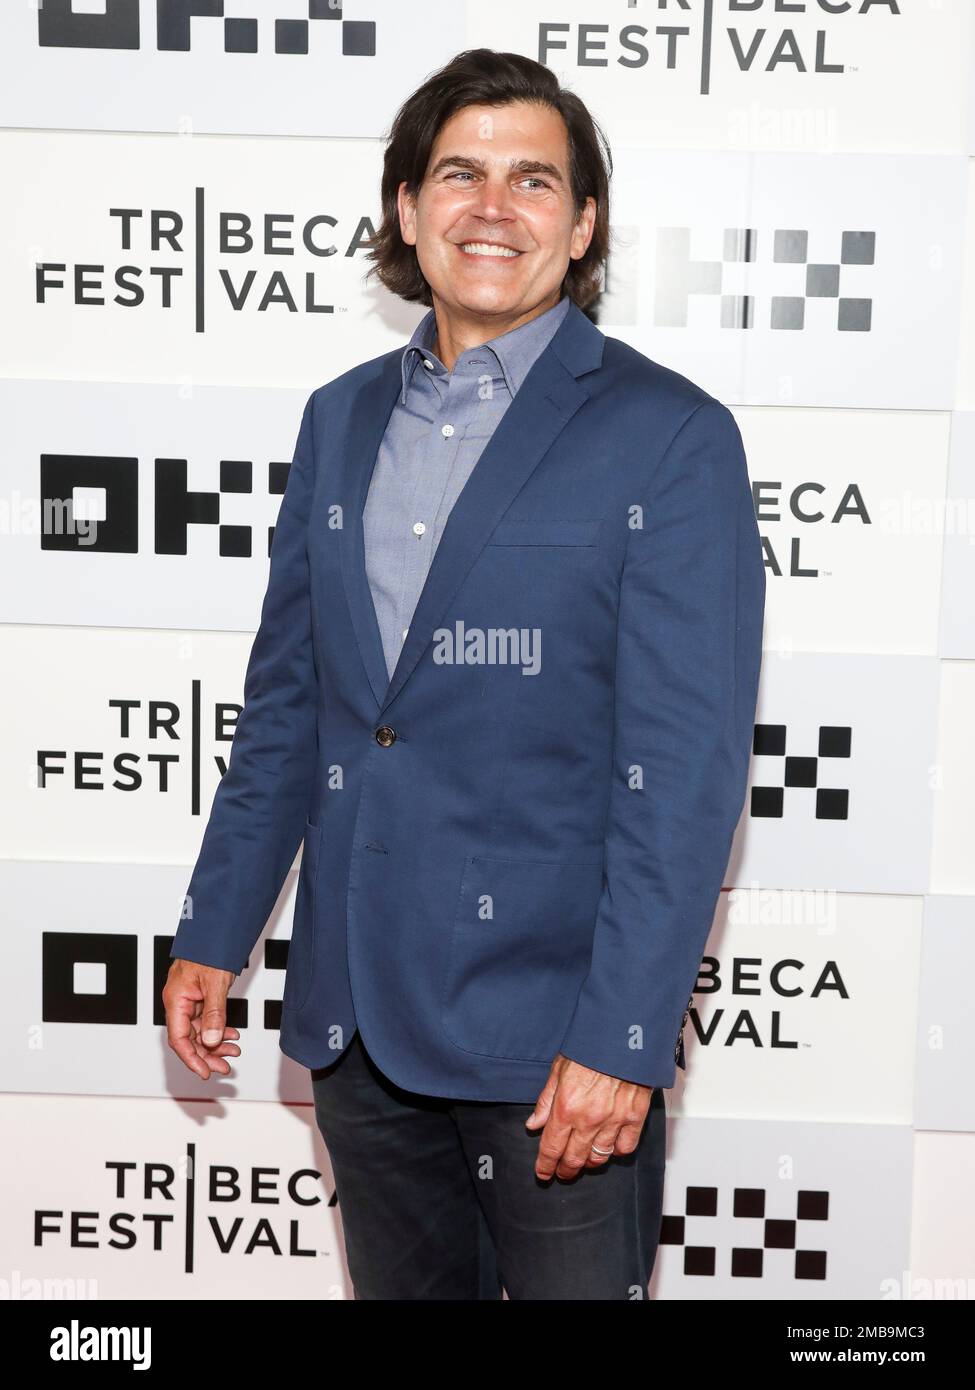 Writer Mark the premiere for "Somewhere in Queens" at the BMCC Tribeca Performing Arts Center during the 2022 Tribeca Festival on Friday, June 10, in New York. (Photo